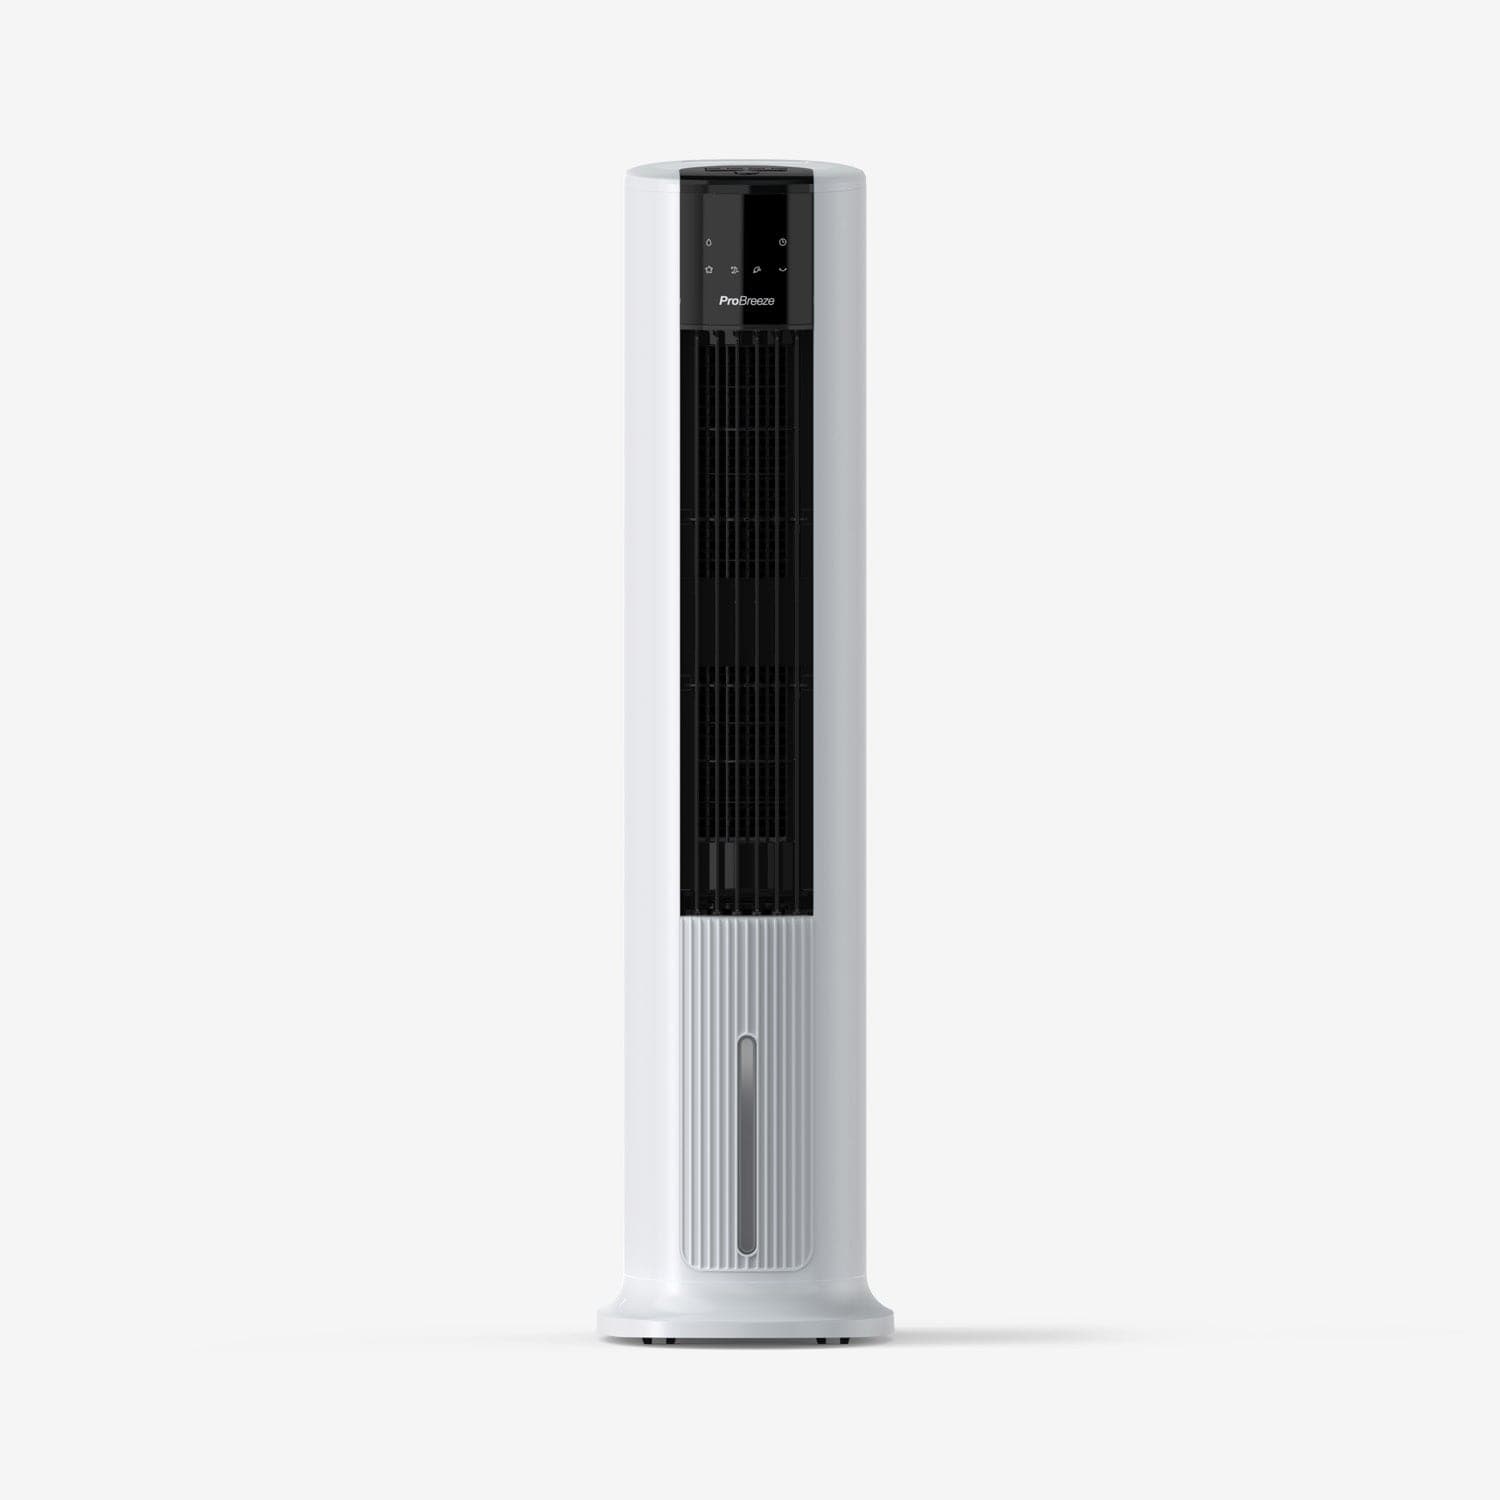 7L Evaporative Air Cooler & Portable Tower Fan with Sleep, Natural and Humidification Modes